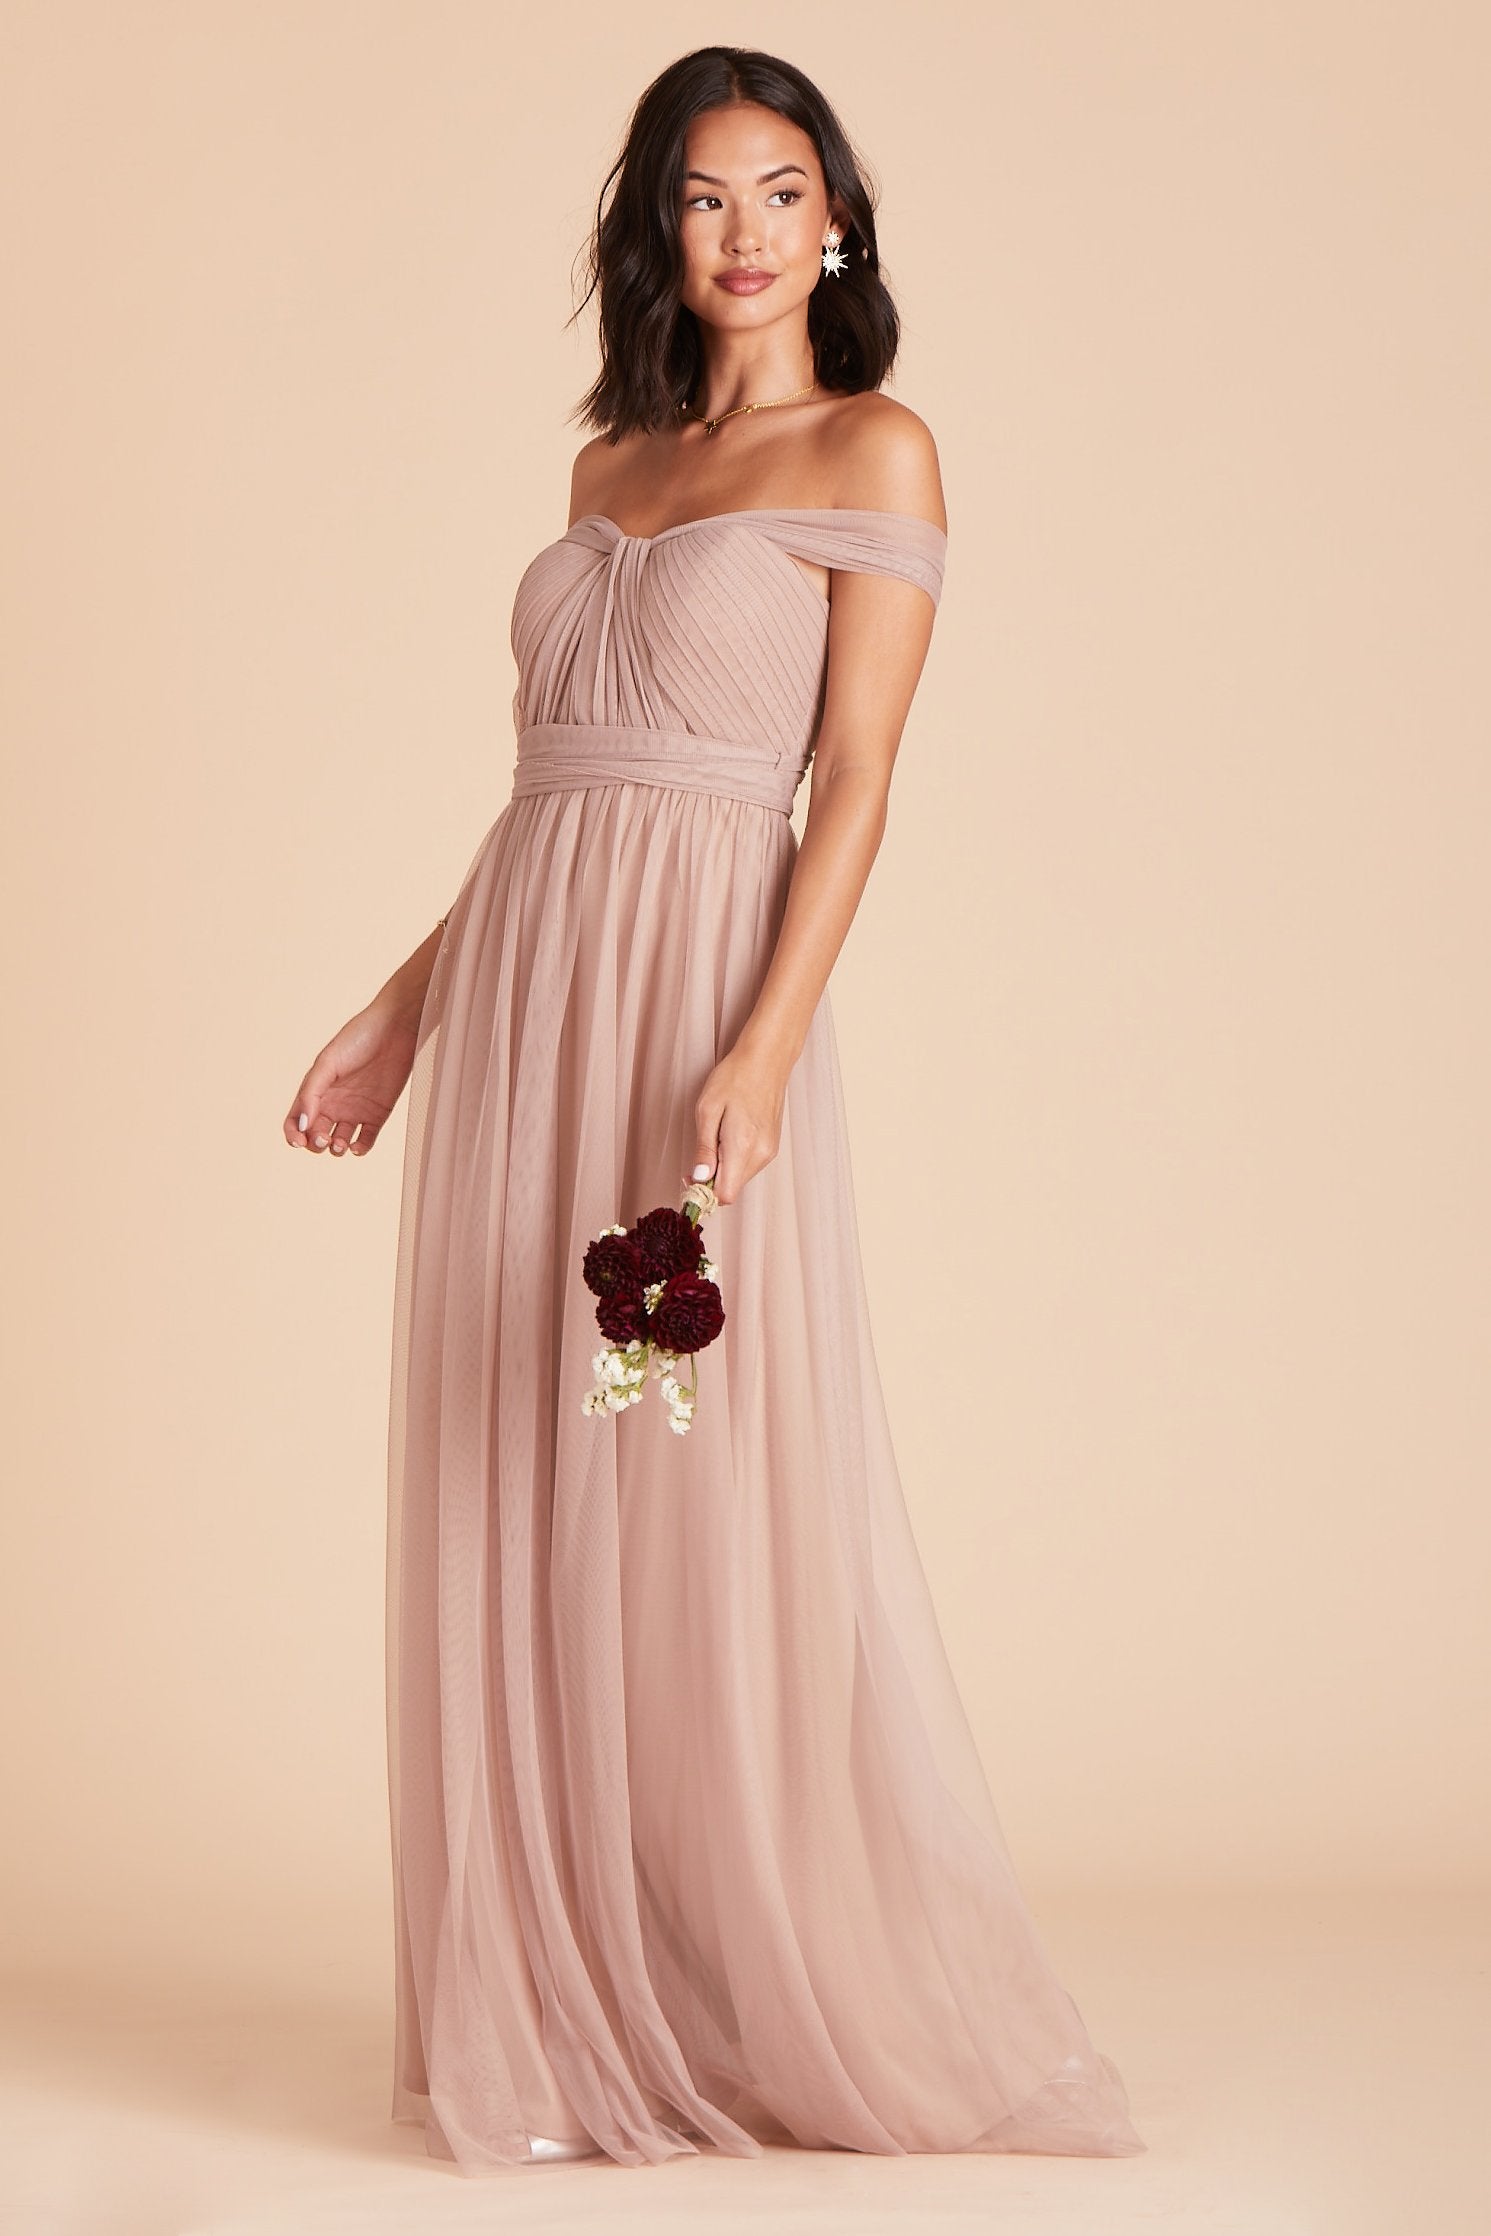 Christina convertible bridesmaid dress in sandy taupe tulle by Birdy Grey, front view